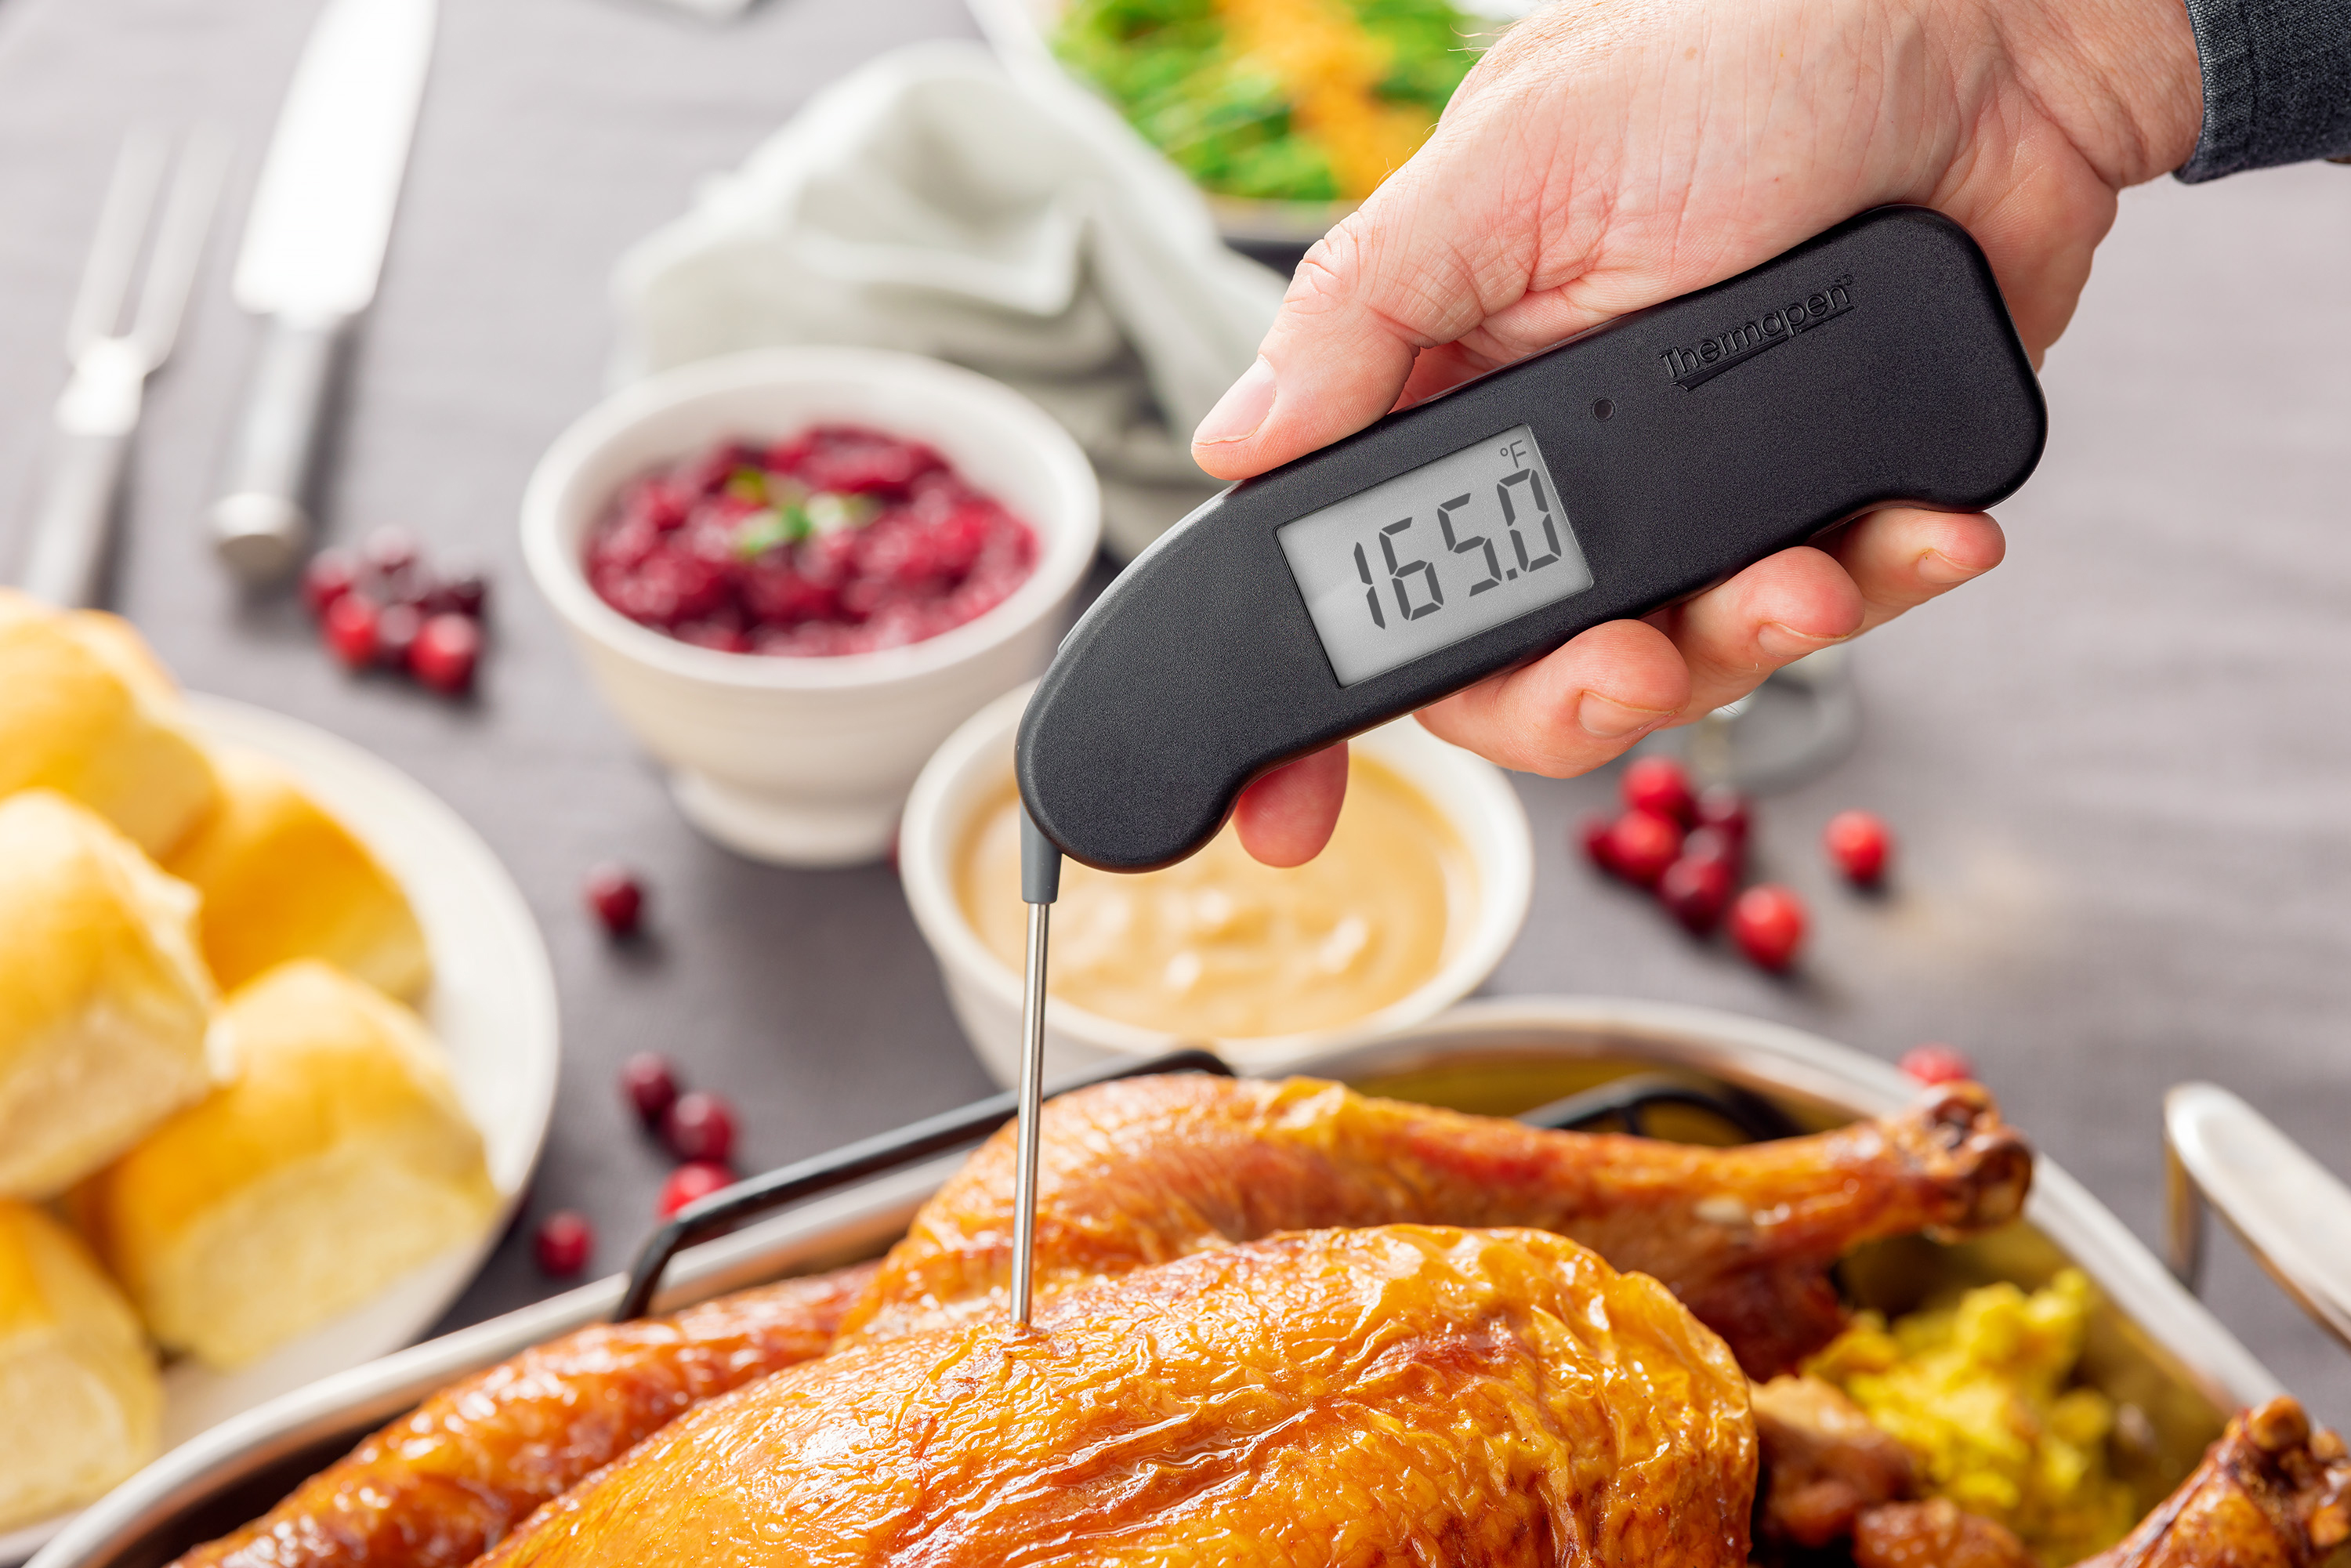 WORLD'S FIRST ONE-SECOND INSTANT READ THERMOMETER